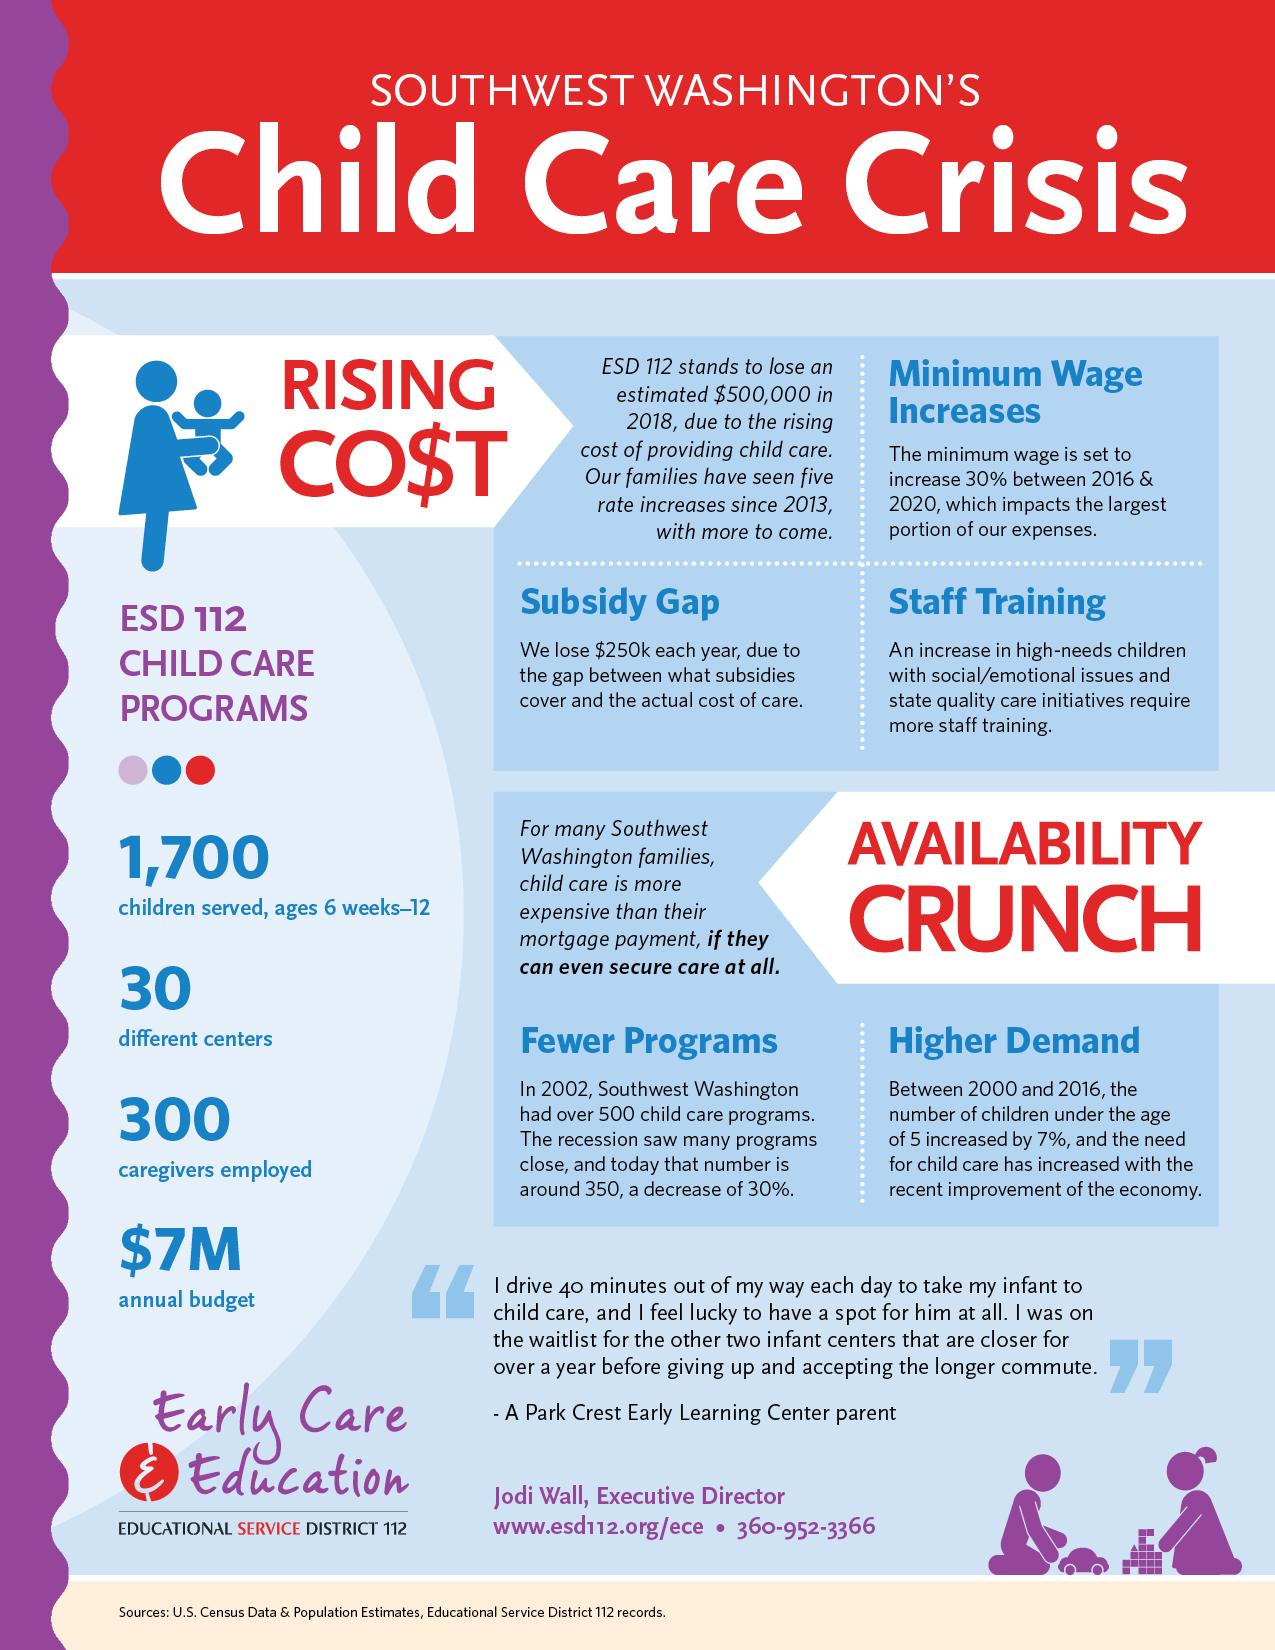 ESD 112 stands to lose an estimated $500,000 in 2018 due to the rising cost of providing child care. For many Southwest Washington families, child care is more expensive than their mortgage payment, if they can even secure care at all.